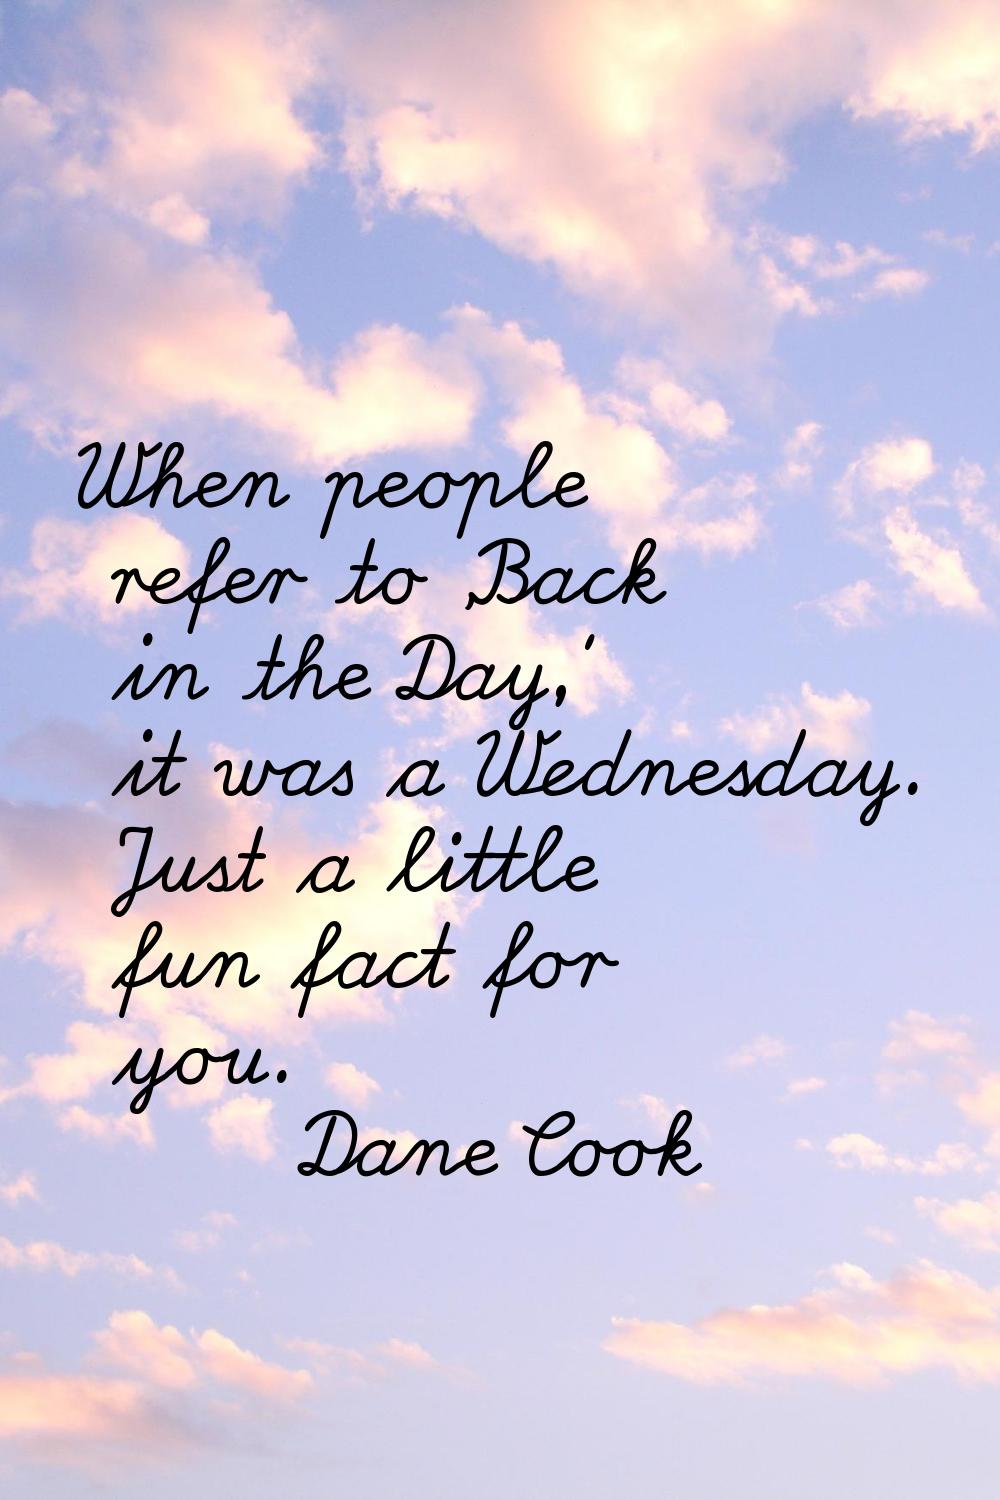 When people refer to 'Back in the Day,' it was a Wednesday. Just a little fun fact for you.